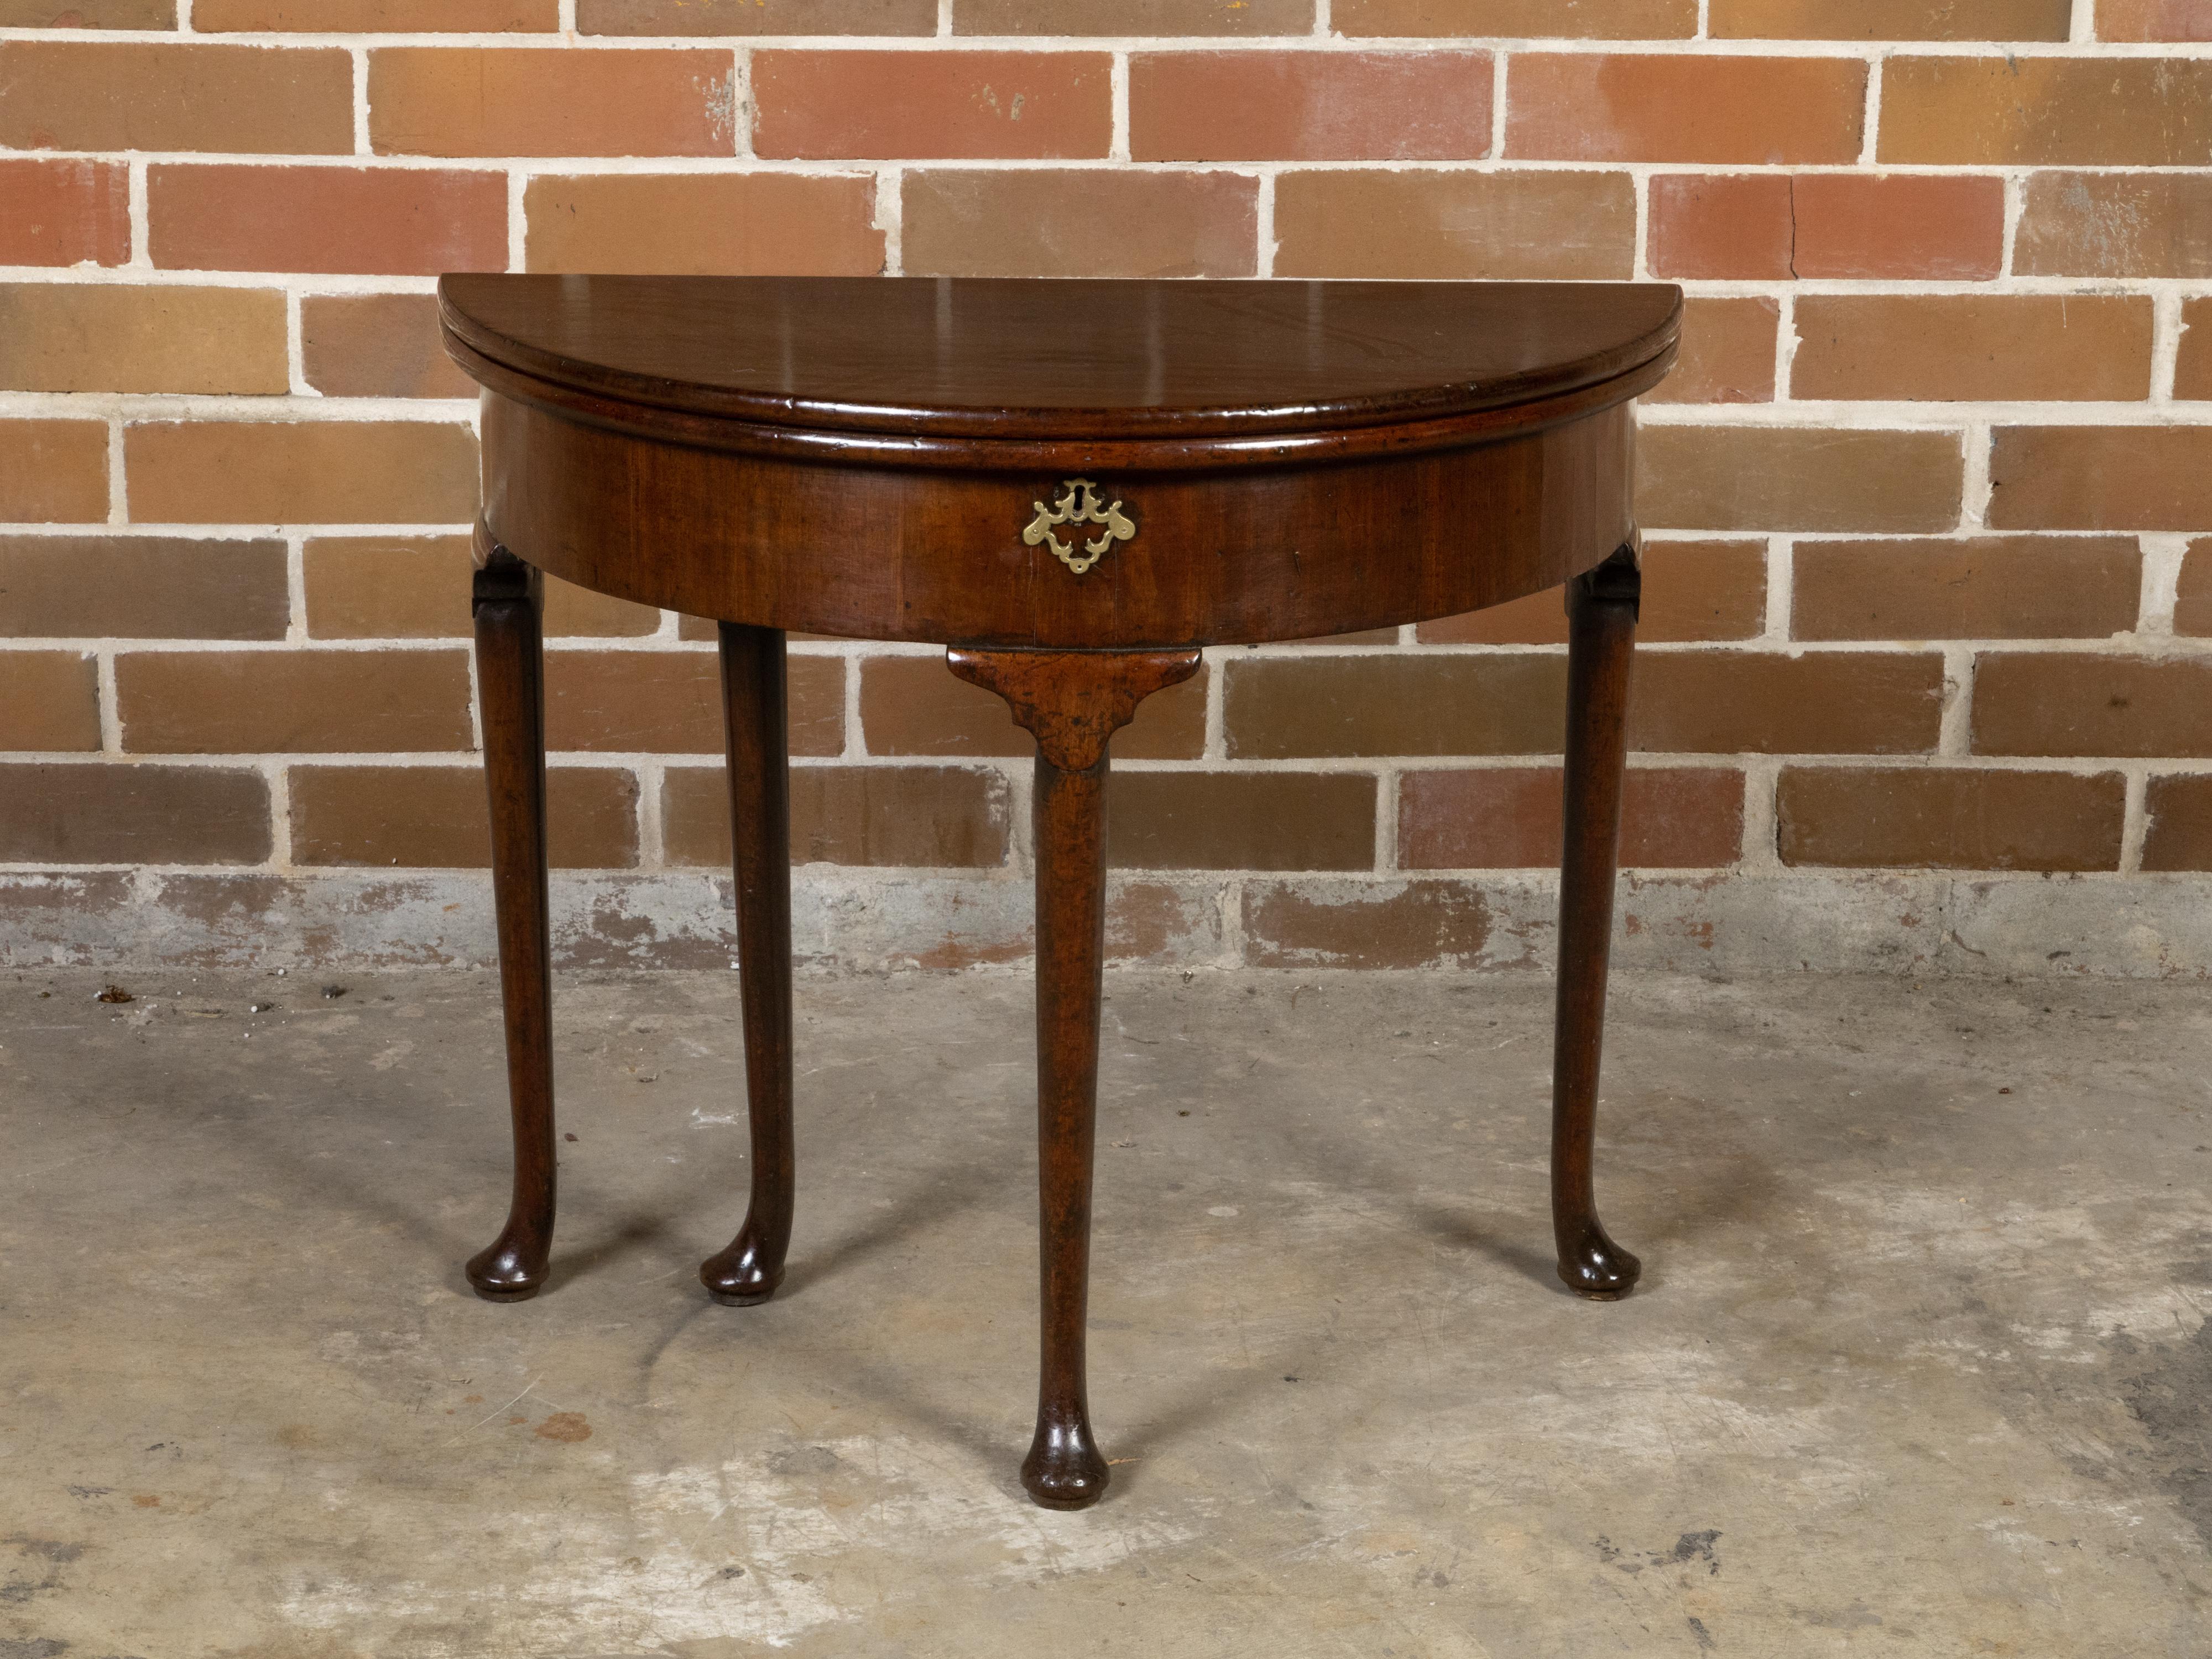 An English Georgian period demi-lune console table from the early 19th century, with flip top, leather inset and gilt frieze. Created in England during the Georgian period in the first quarter of the 19th century, this lovely demi-lune table